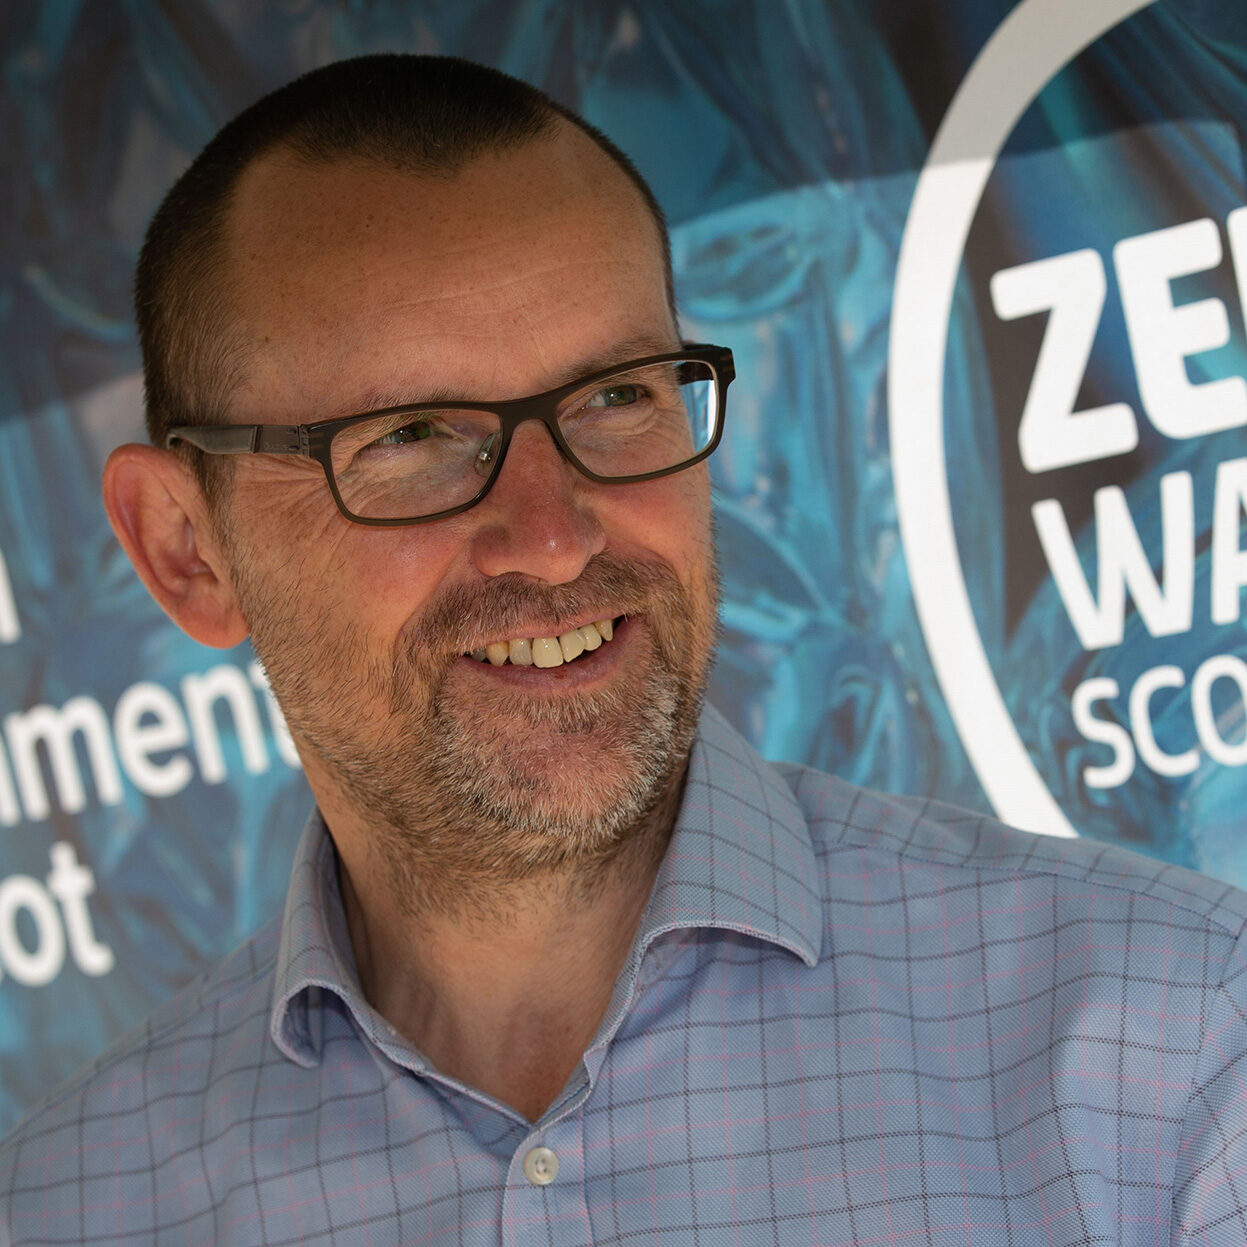 FREE PICTURES 
Pictured Iain Gulland, CEO, Zero Waste Scotland
A Public consultation on a Scottish deposit return scheme was officially opened by the Scottish Government this morning (Wednesday 27 June, 2018).
Now, members of the public are being called upon to have their say on how deposit return could work best for Scotland by speaking to Zero Waste Scotland at our first public engagement event on deposit return – which was held at Glasgow Fort this Friday morning (29 June).
 
Should you have any queries or other requests, please don’t hesitate to get in touch with me.
 
Harriet Brace | PR Project Manager | Zero Waste Scotland
Direct 01786 237342 | Mobile 07816 226323 | Reception 01786 433930
Email: Harriet.Brace@zerowastescotland.org.uk

Mark F Gibson  / Warren Media

pictures@warrenmedia.co.uk
www.warrenmedia.co.uk

All images © Warren Media 2015. Free first use only for editorial in connection with the commissioning client's  press-released story. All other rights are reserved. Use in any other context is expressly prohibited without prior permission.